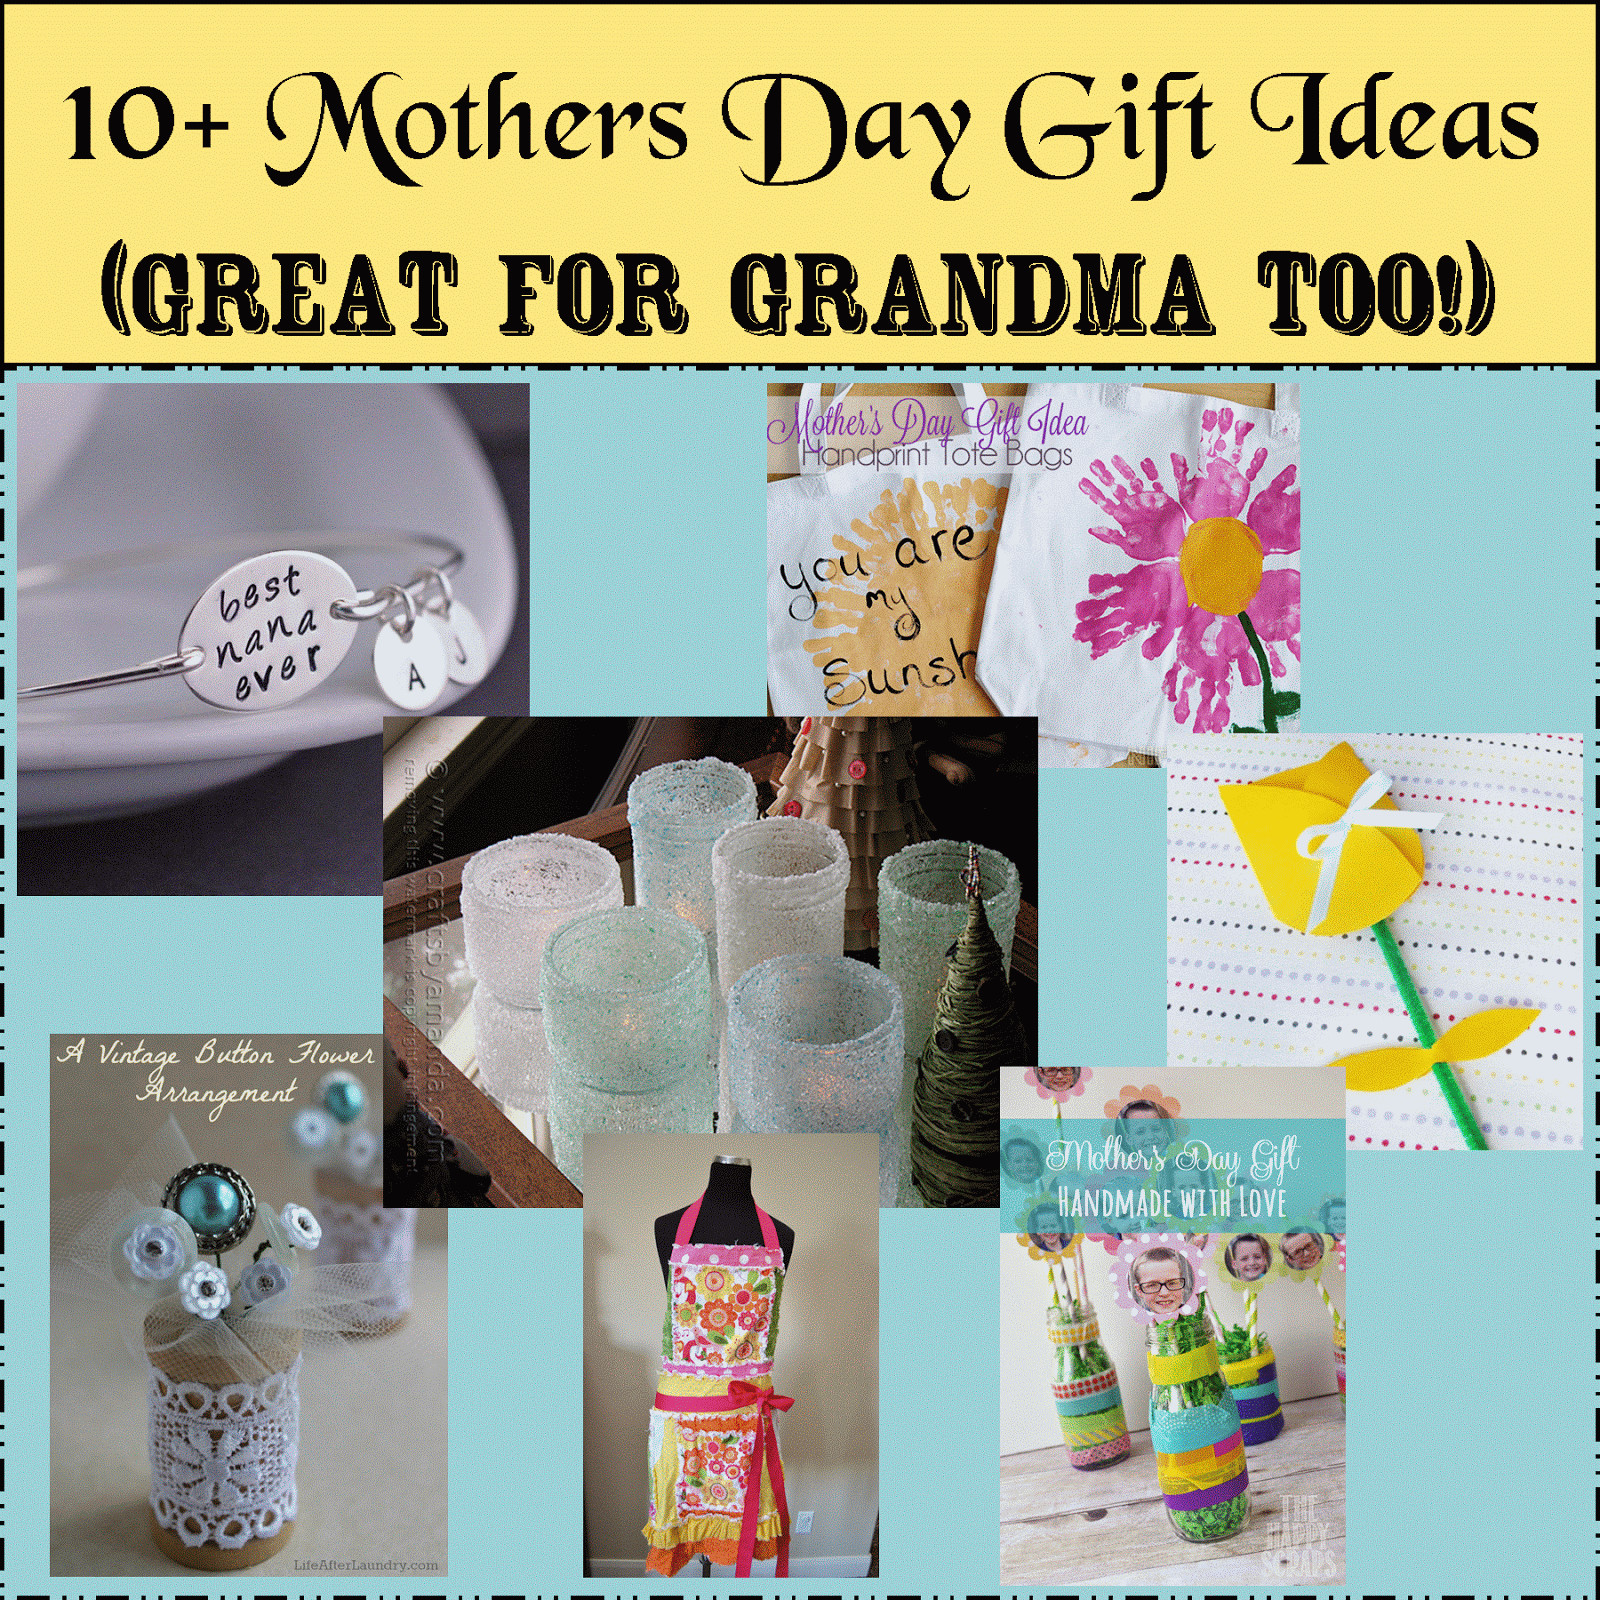 Great Mother'S Day Gift Ideas
 Mother Day Gifts Roundup Perfect for Grandma Too